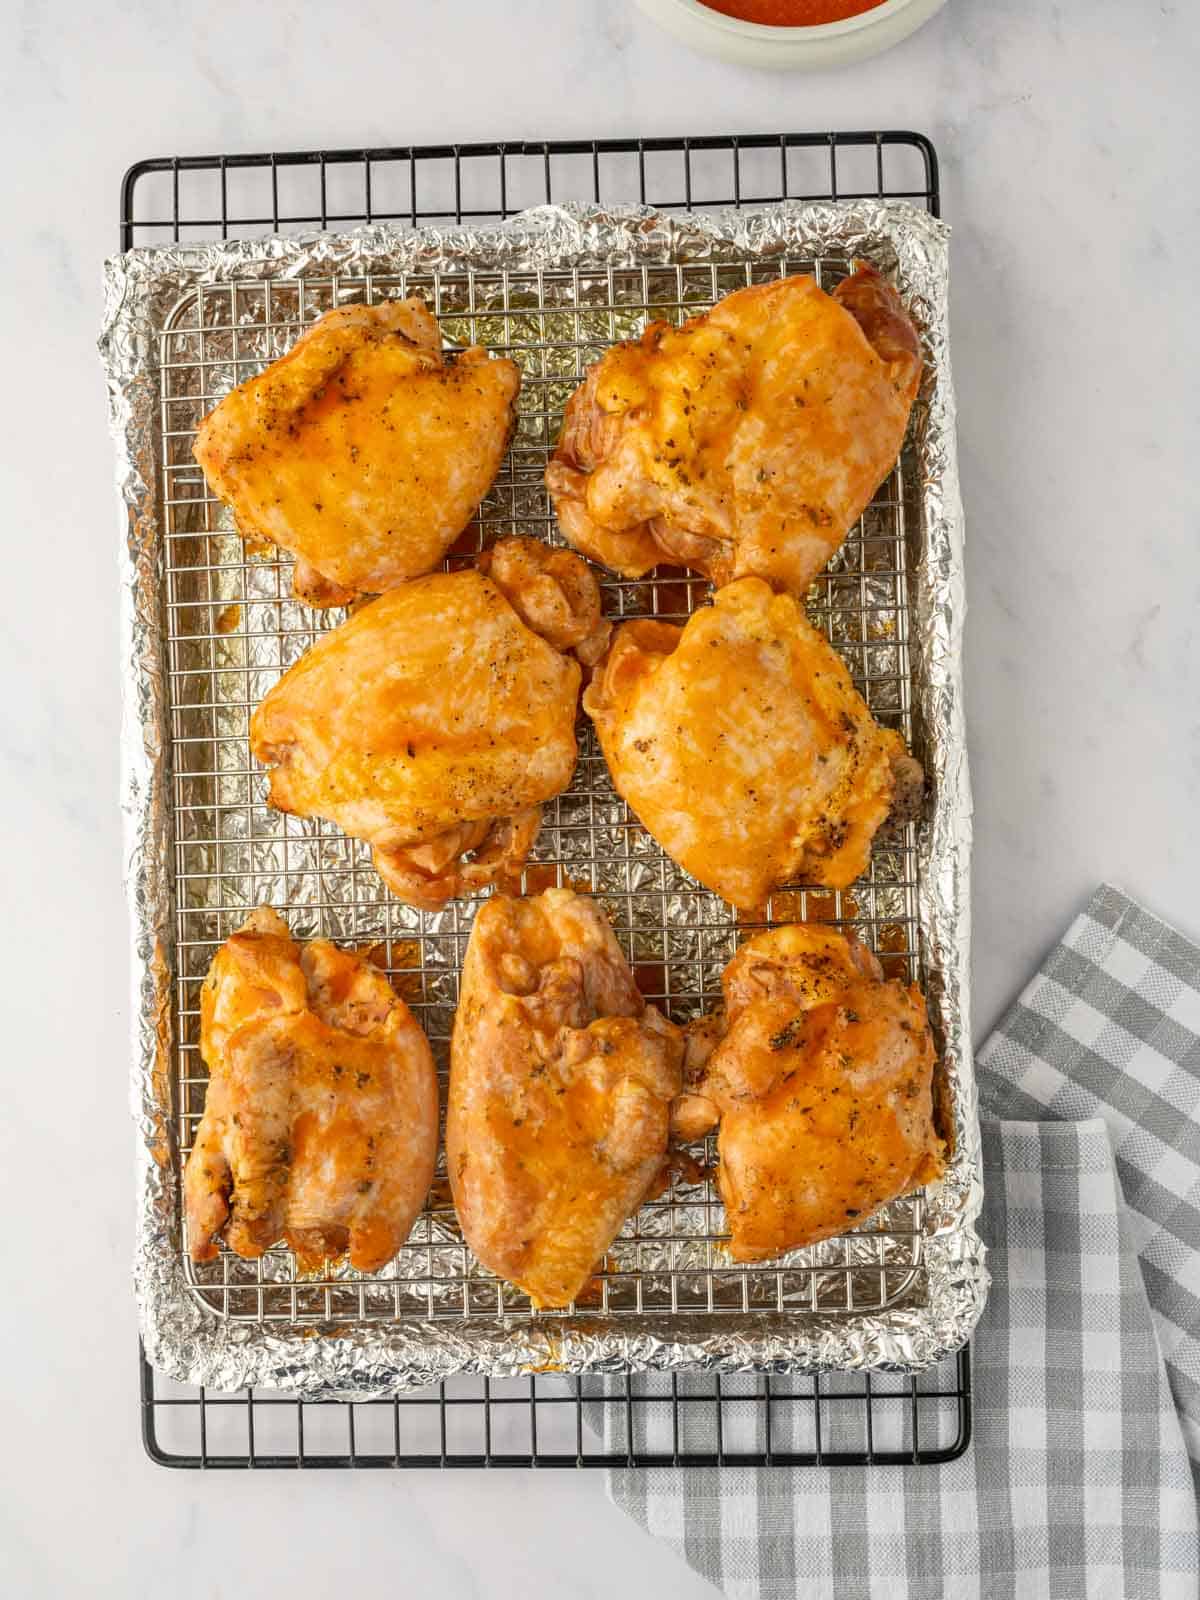 Baked chicken thighs are brushed with buffalo sauce.